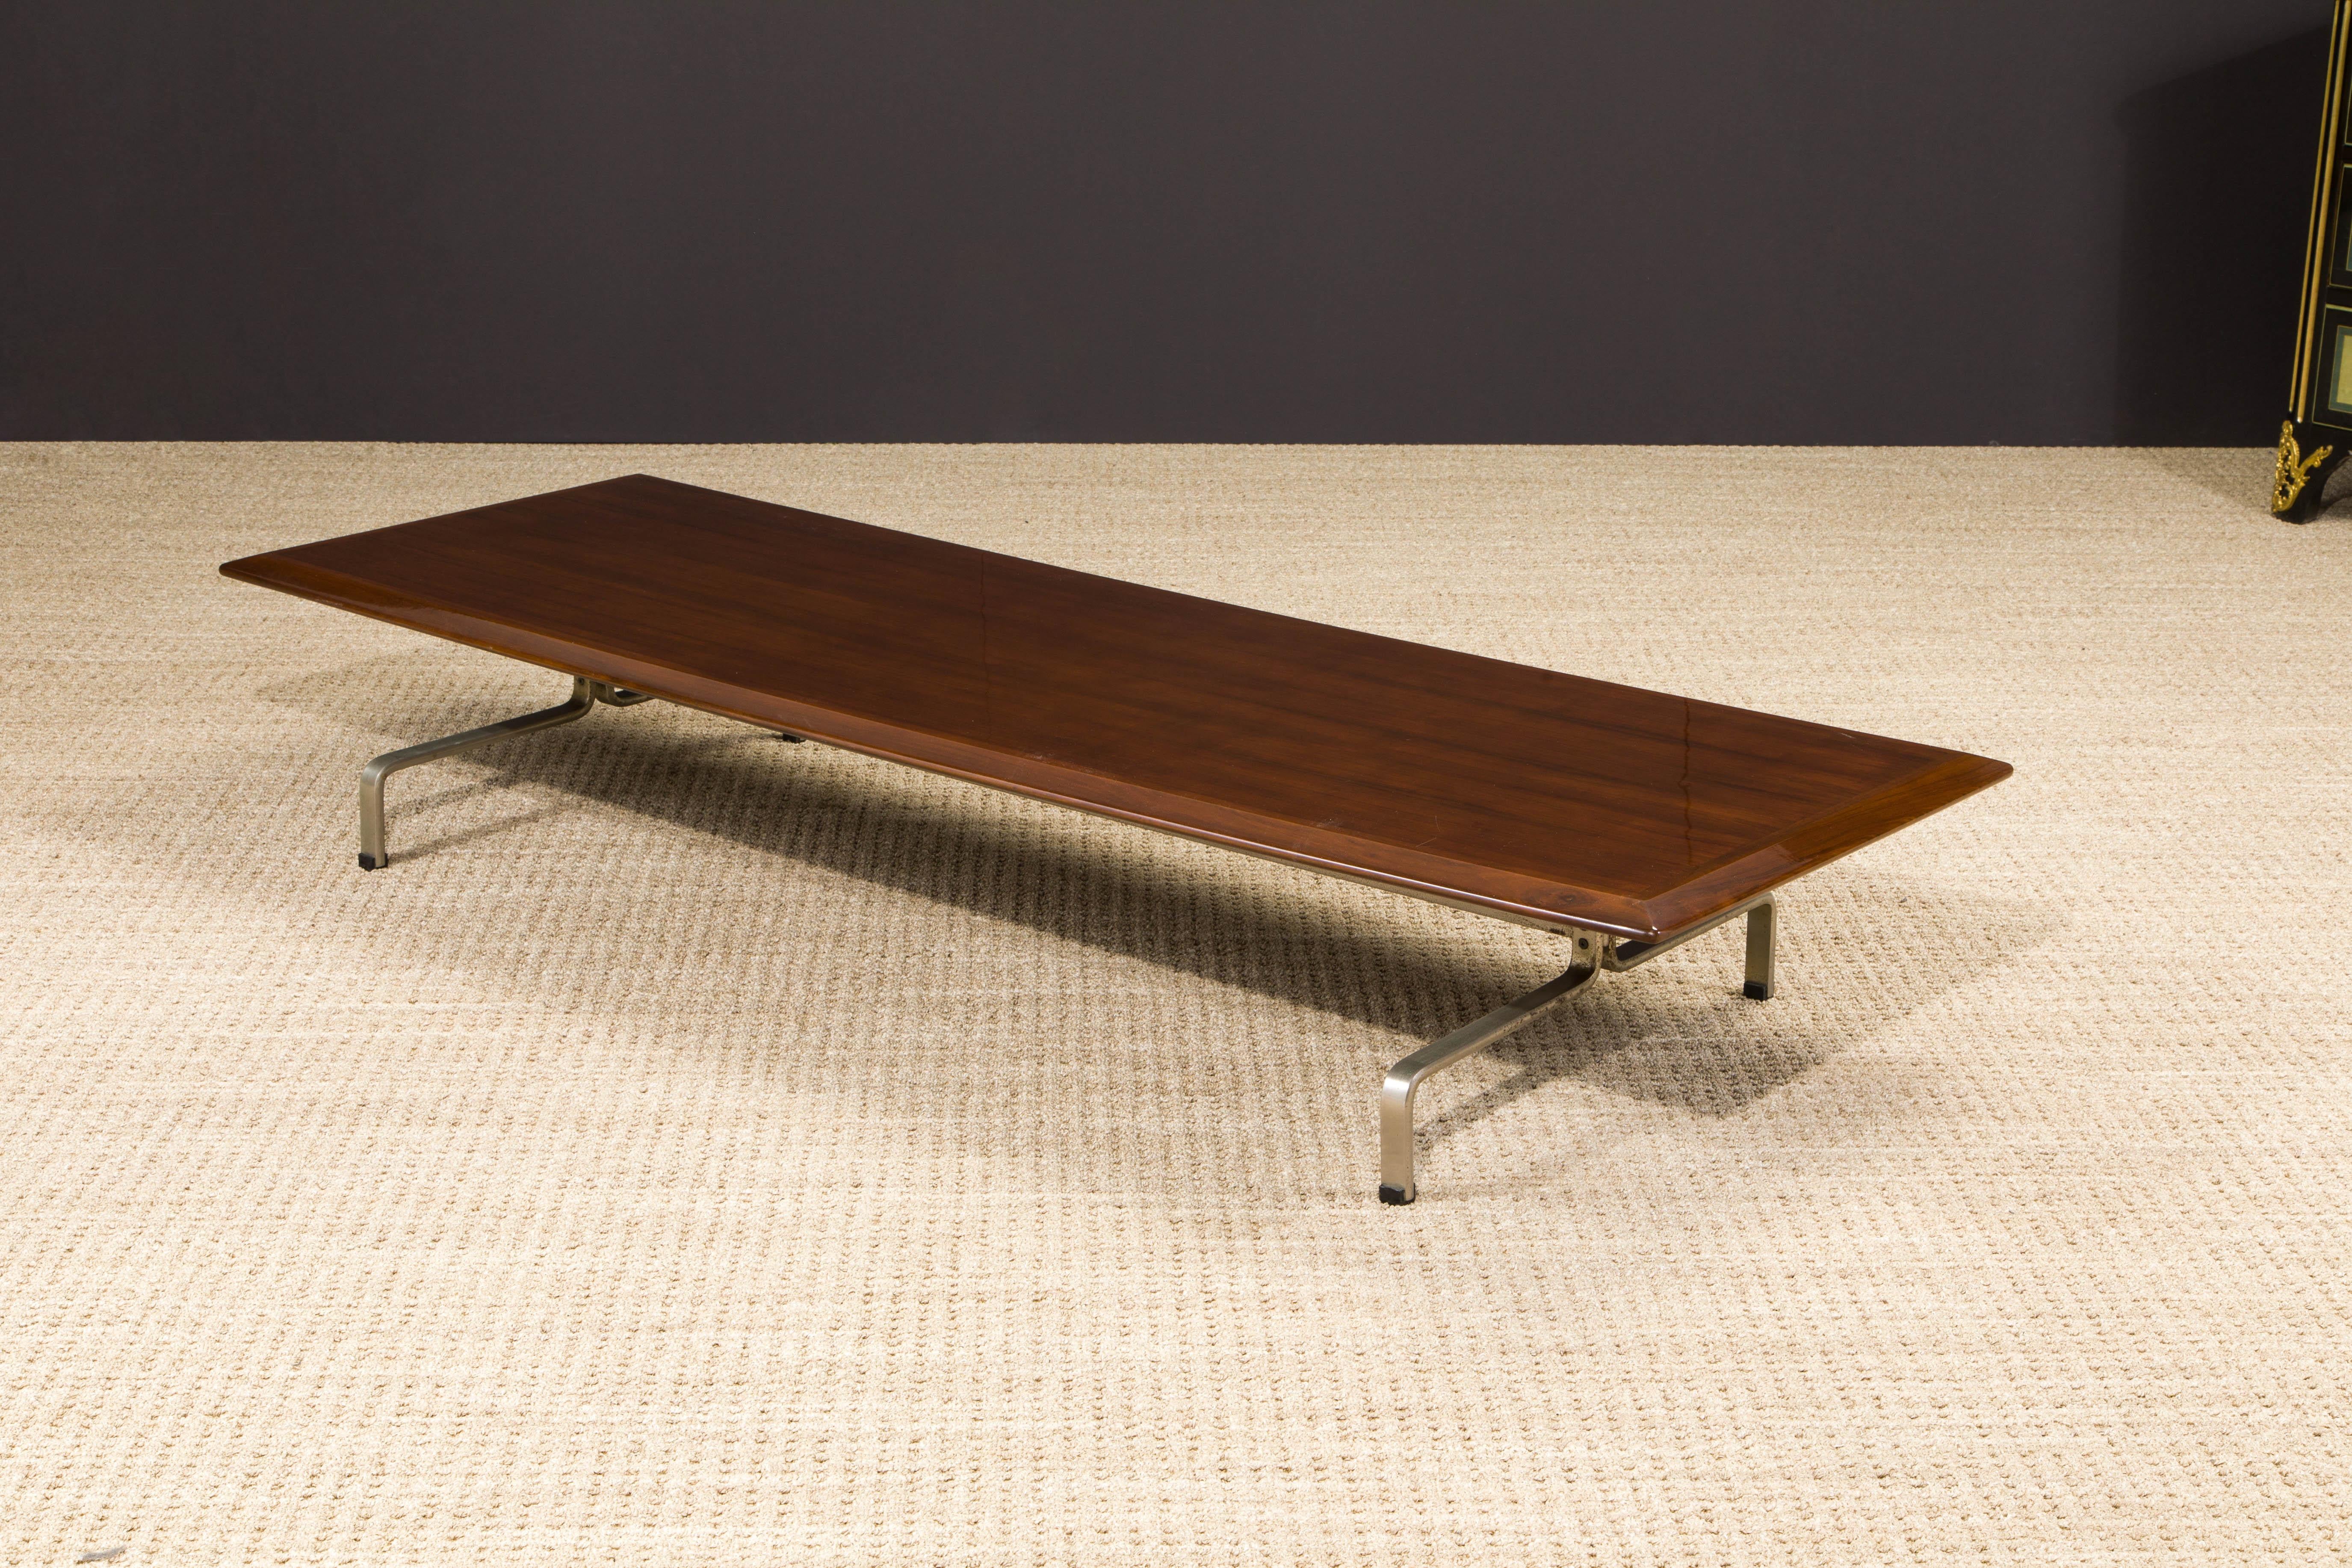 Poul Kjaerholm PK-31 Coffee Table with Rosewood Top, Rare 1